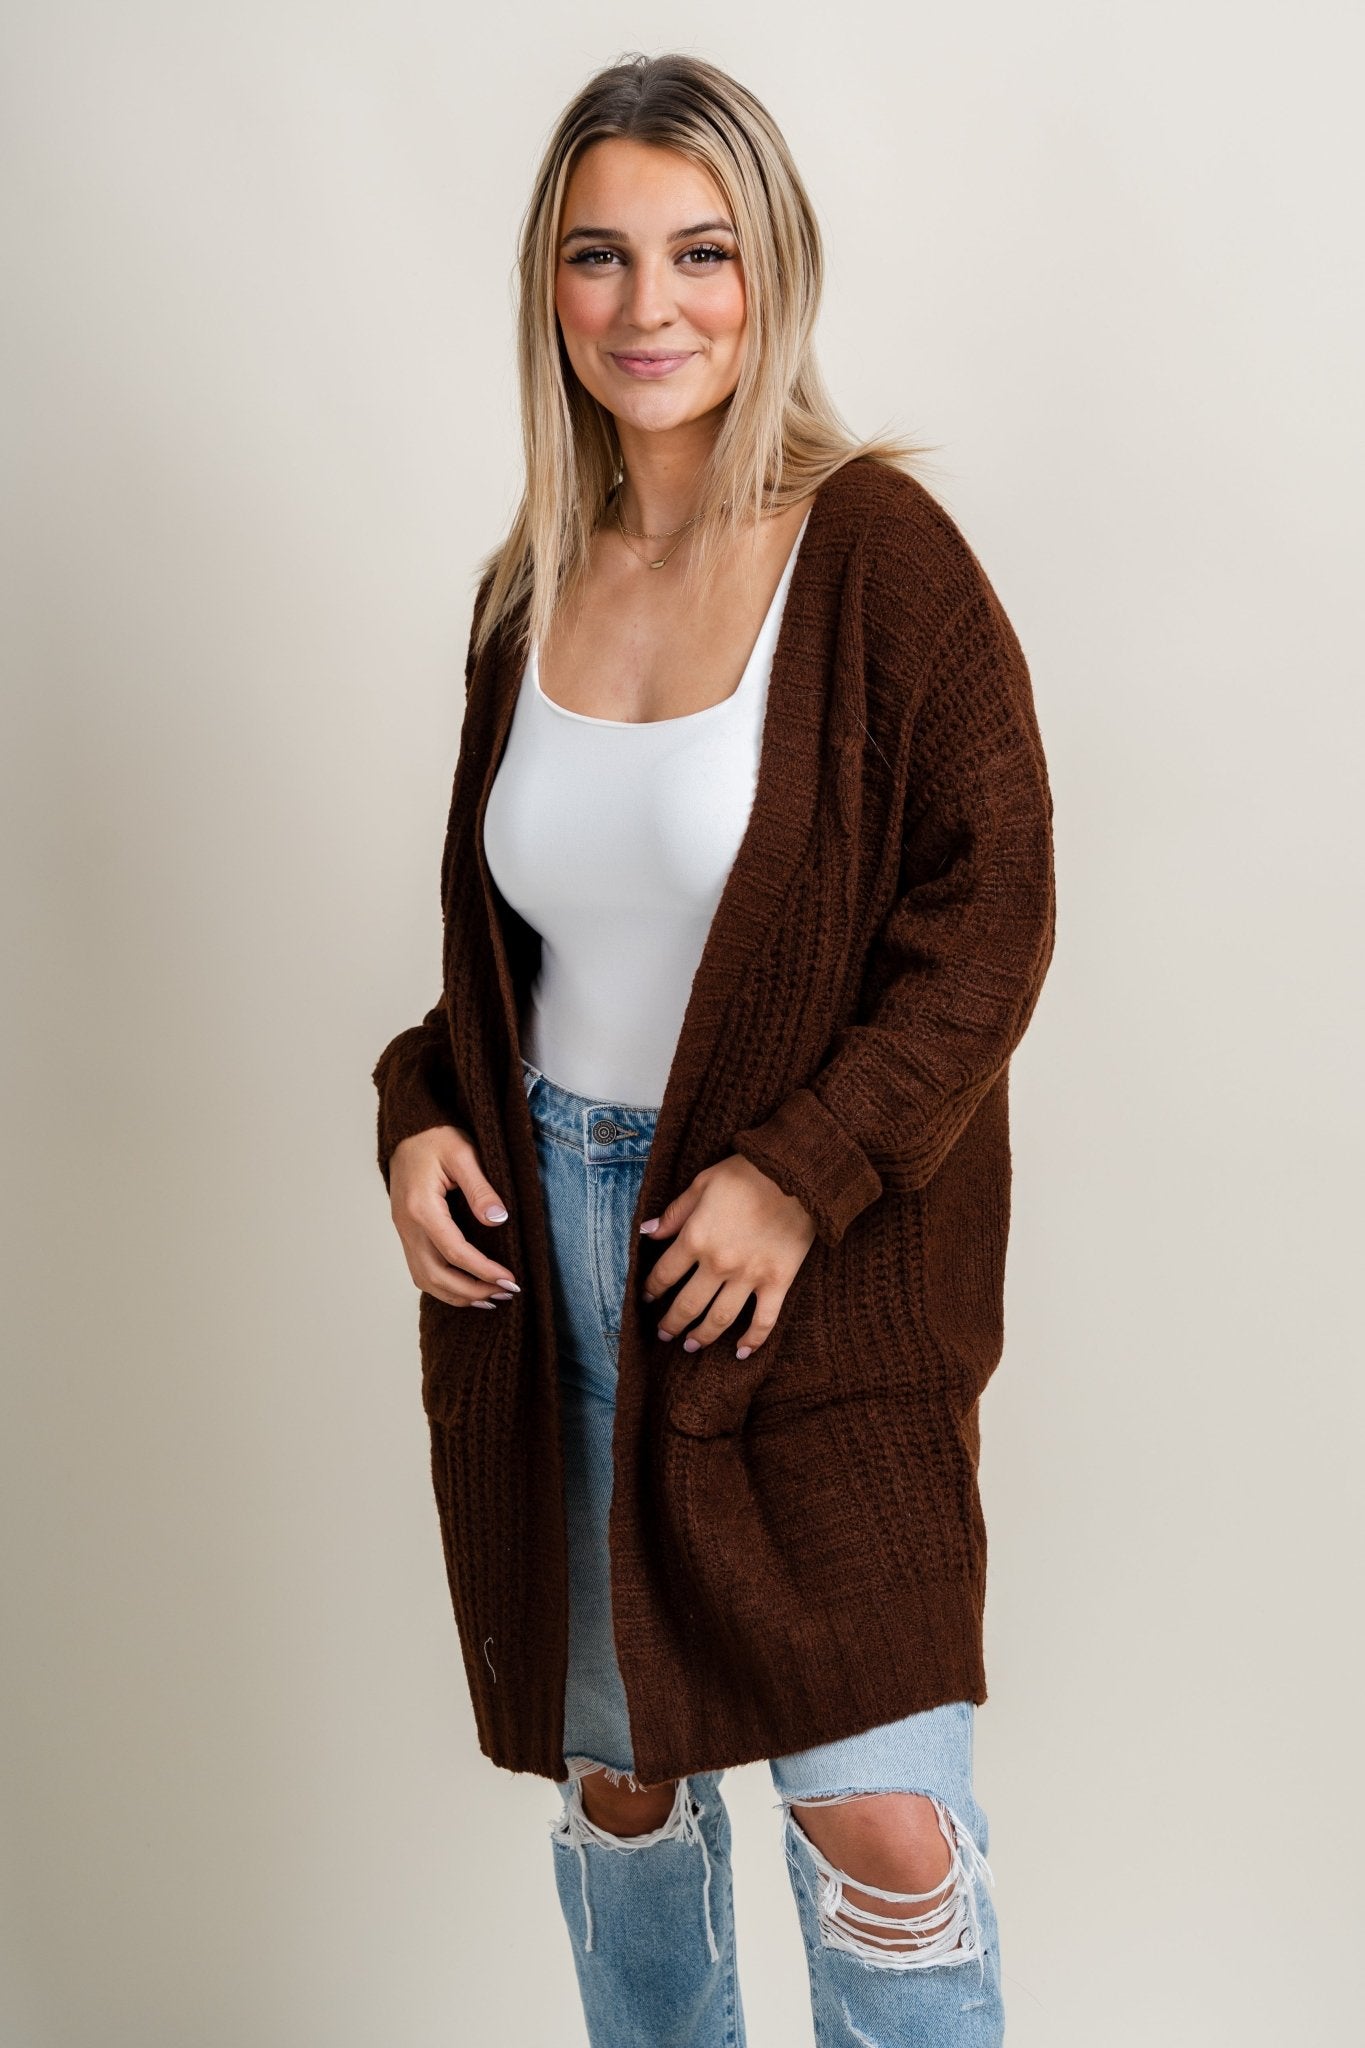 Knit sweater cardigan brown - Affordable Cardigan - Boutique Cardigans & Trendy Kimonos at Lush Fashion Lounge Boutique in Oklahoma City